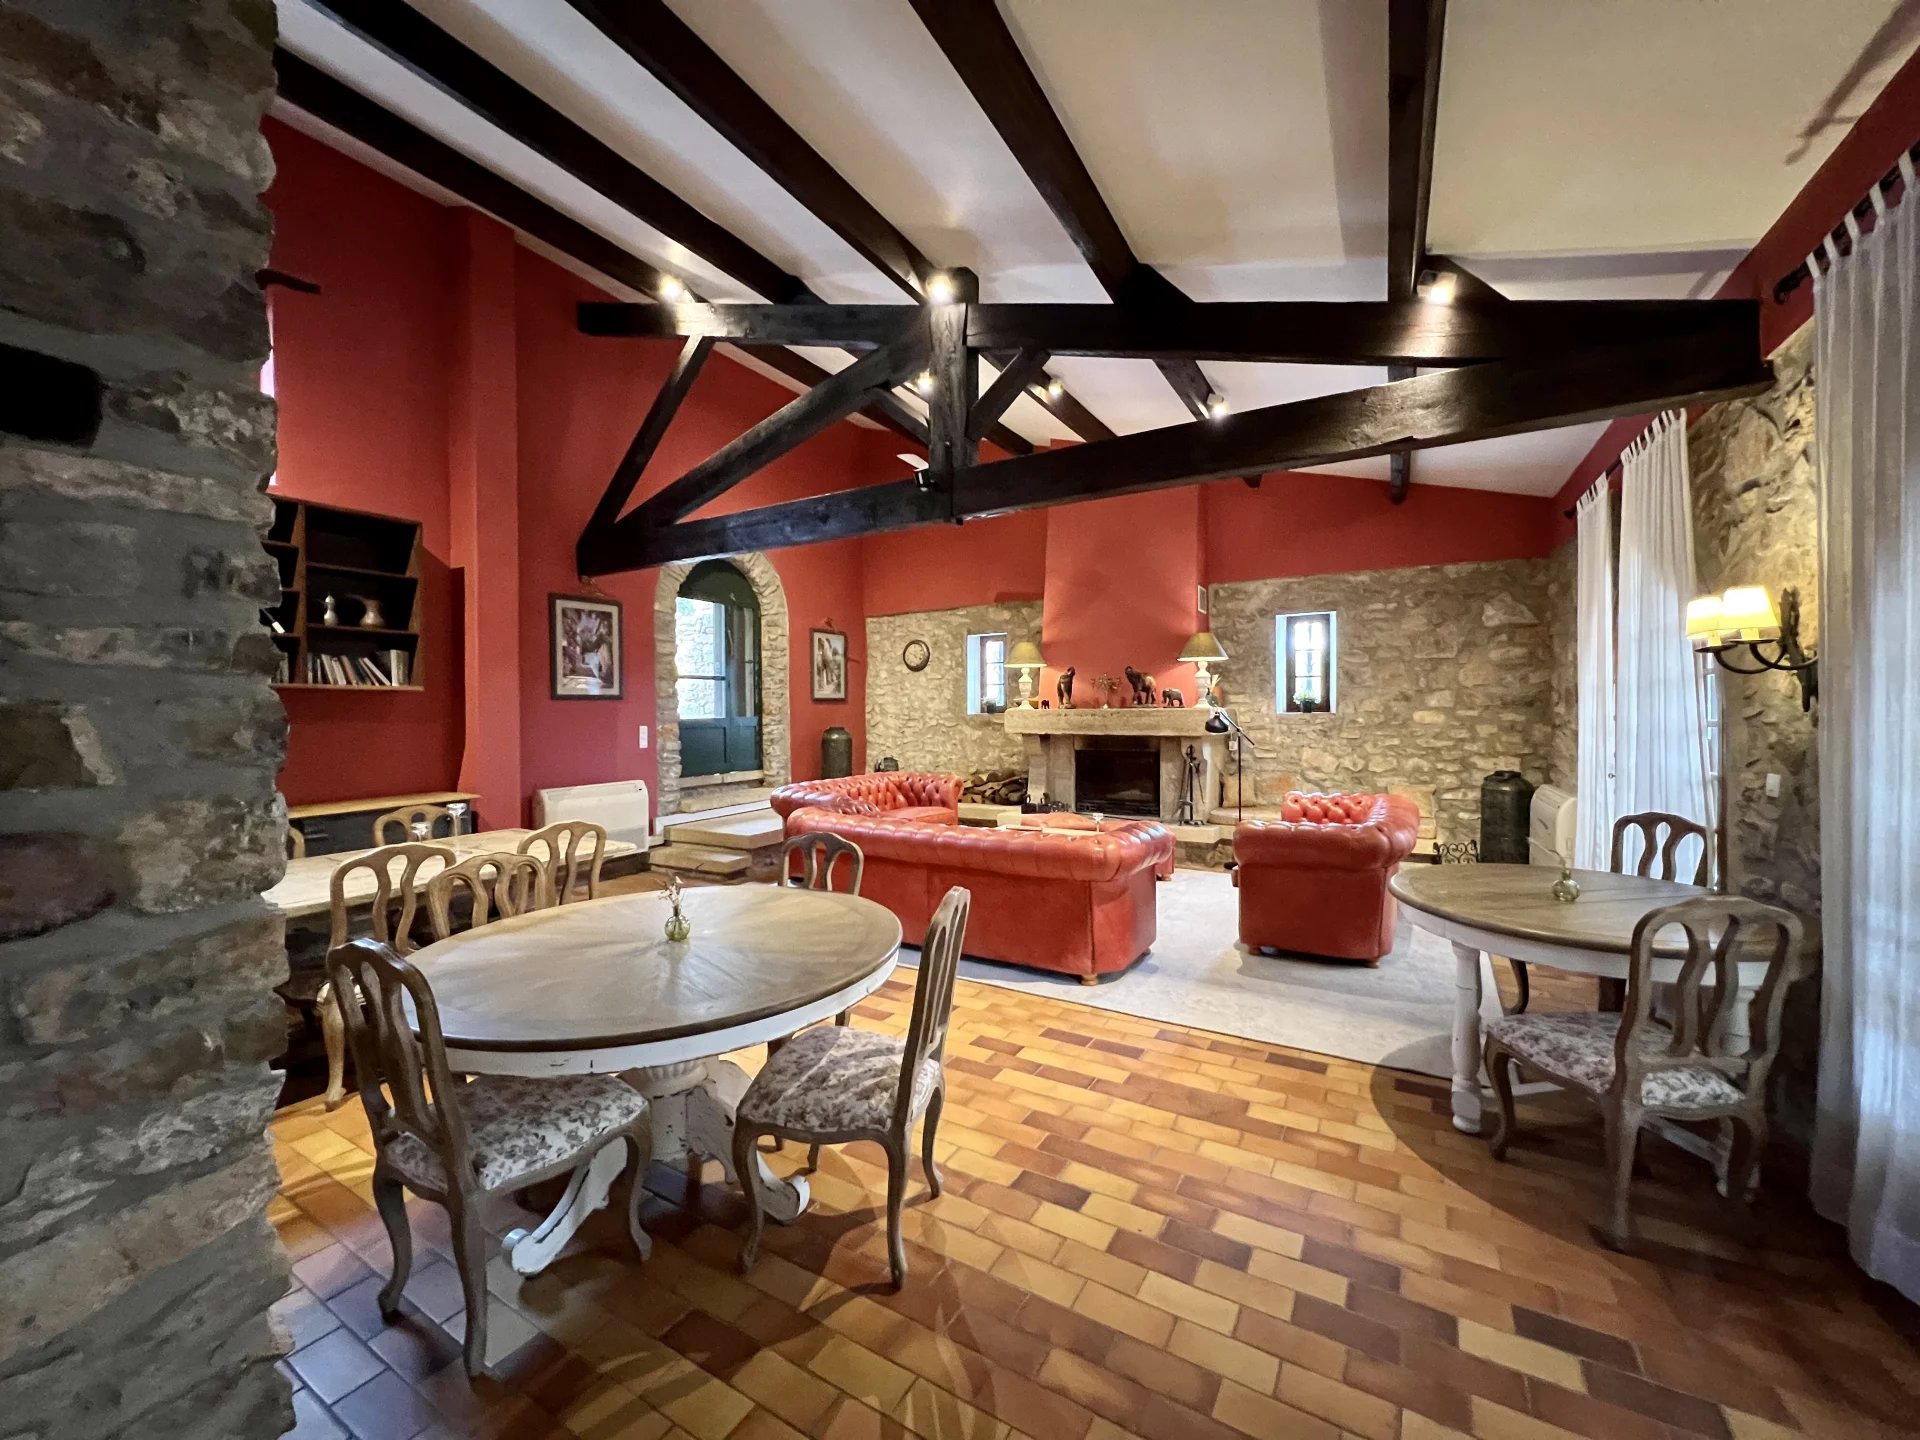 17th century bastide nestled in the heart of 2.8 hectares in Besse sur Issole